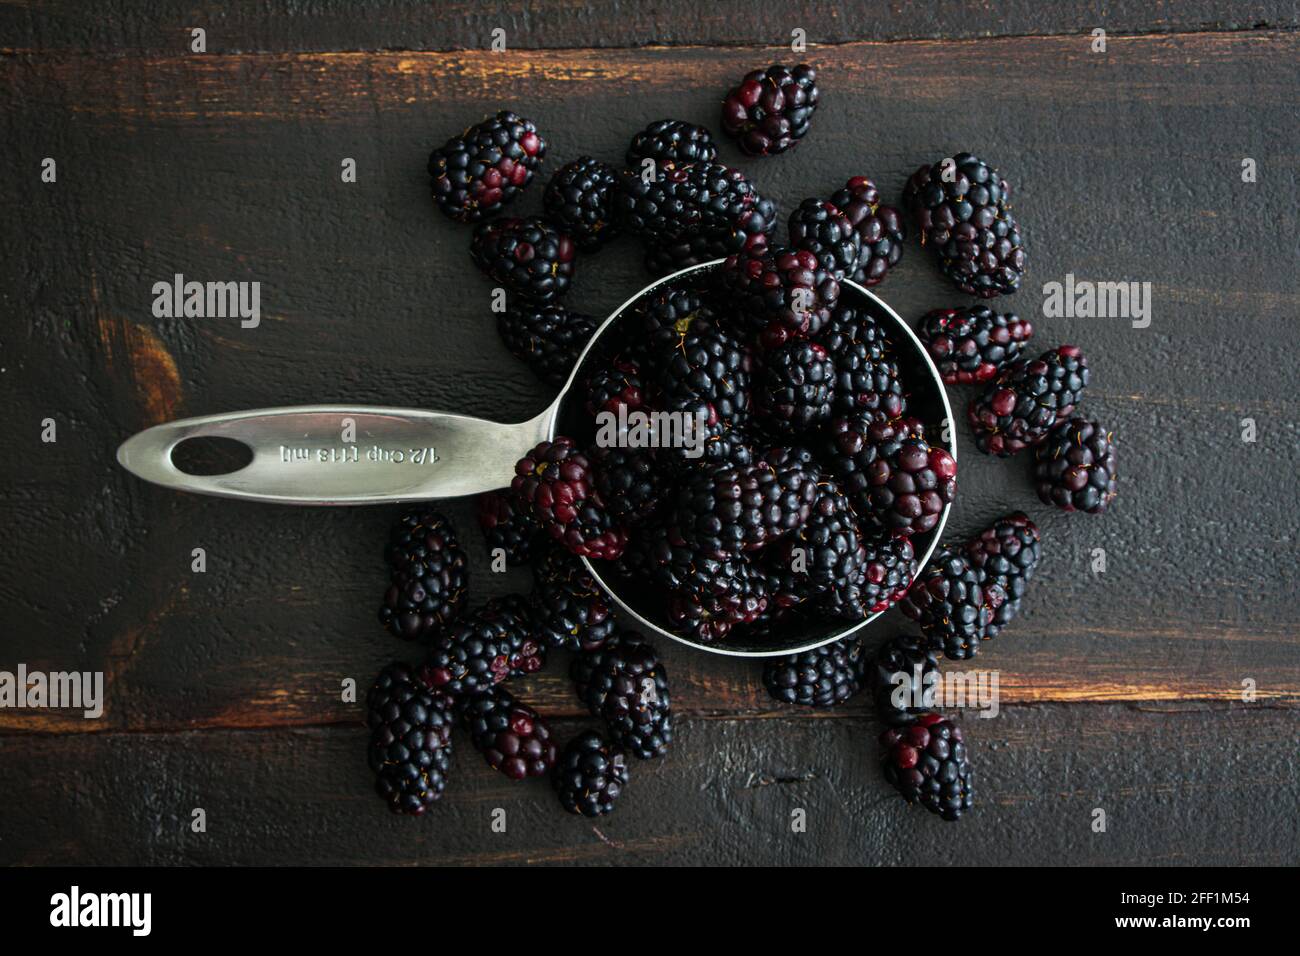 Measuring Cup filled with Fresh Blackberries: A metal measuring cup filled with fresh berries on a wooden table Stock Photo